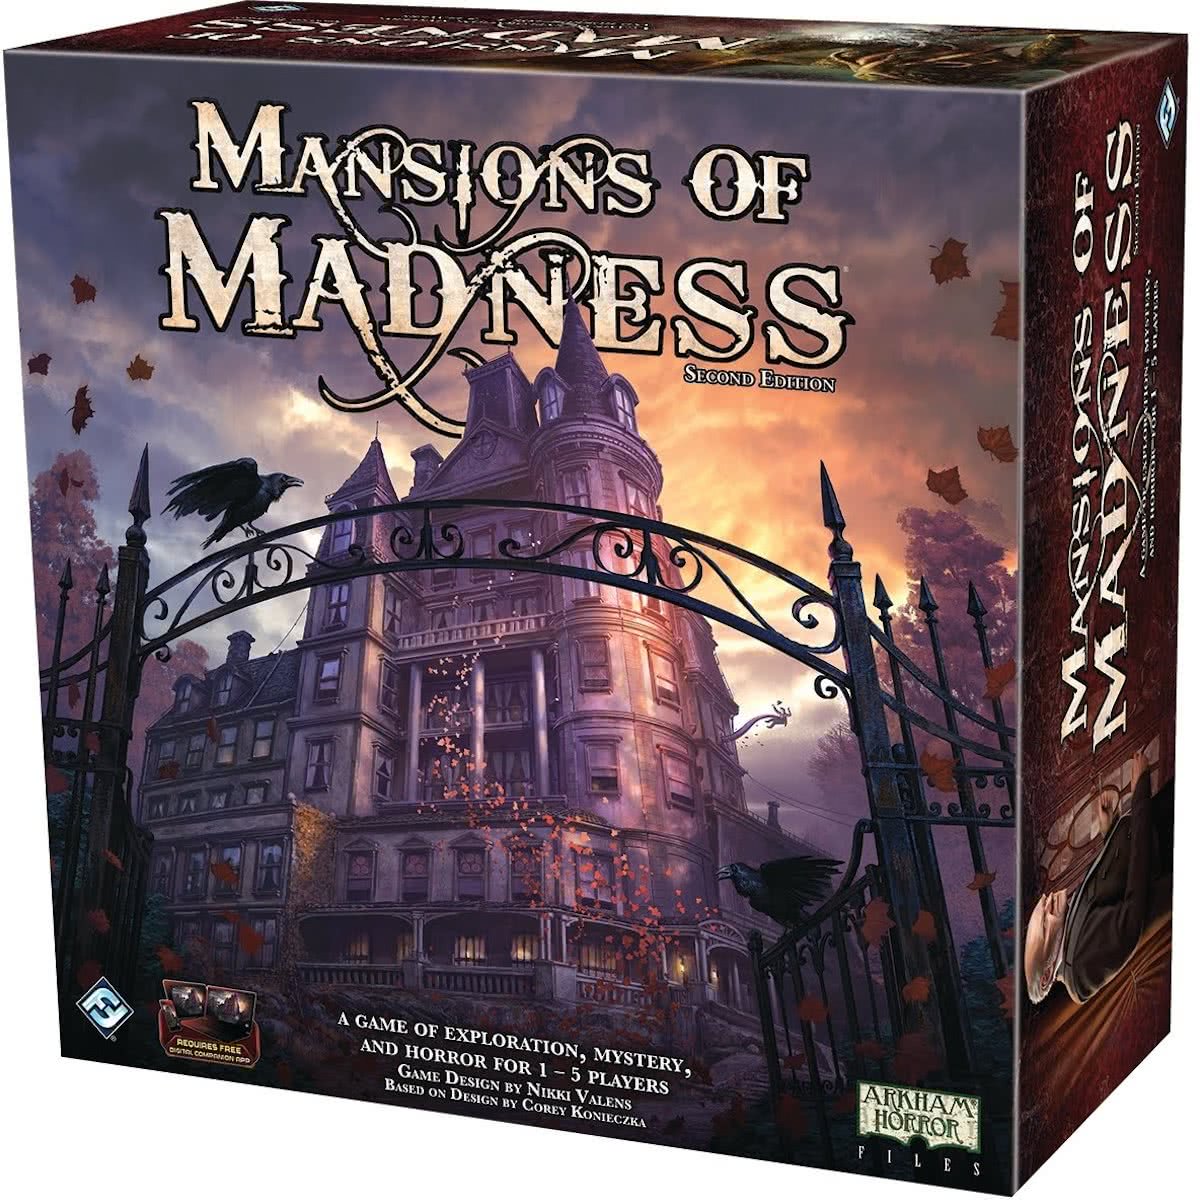 Mansions of Madness: Second Edition description reviews